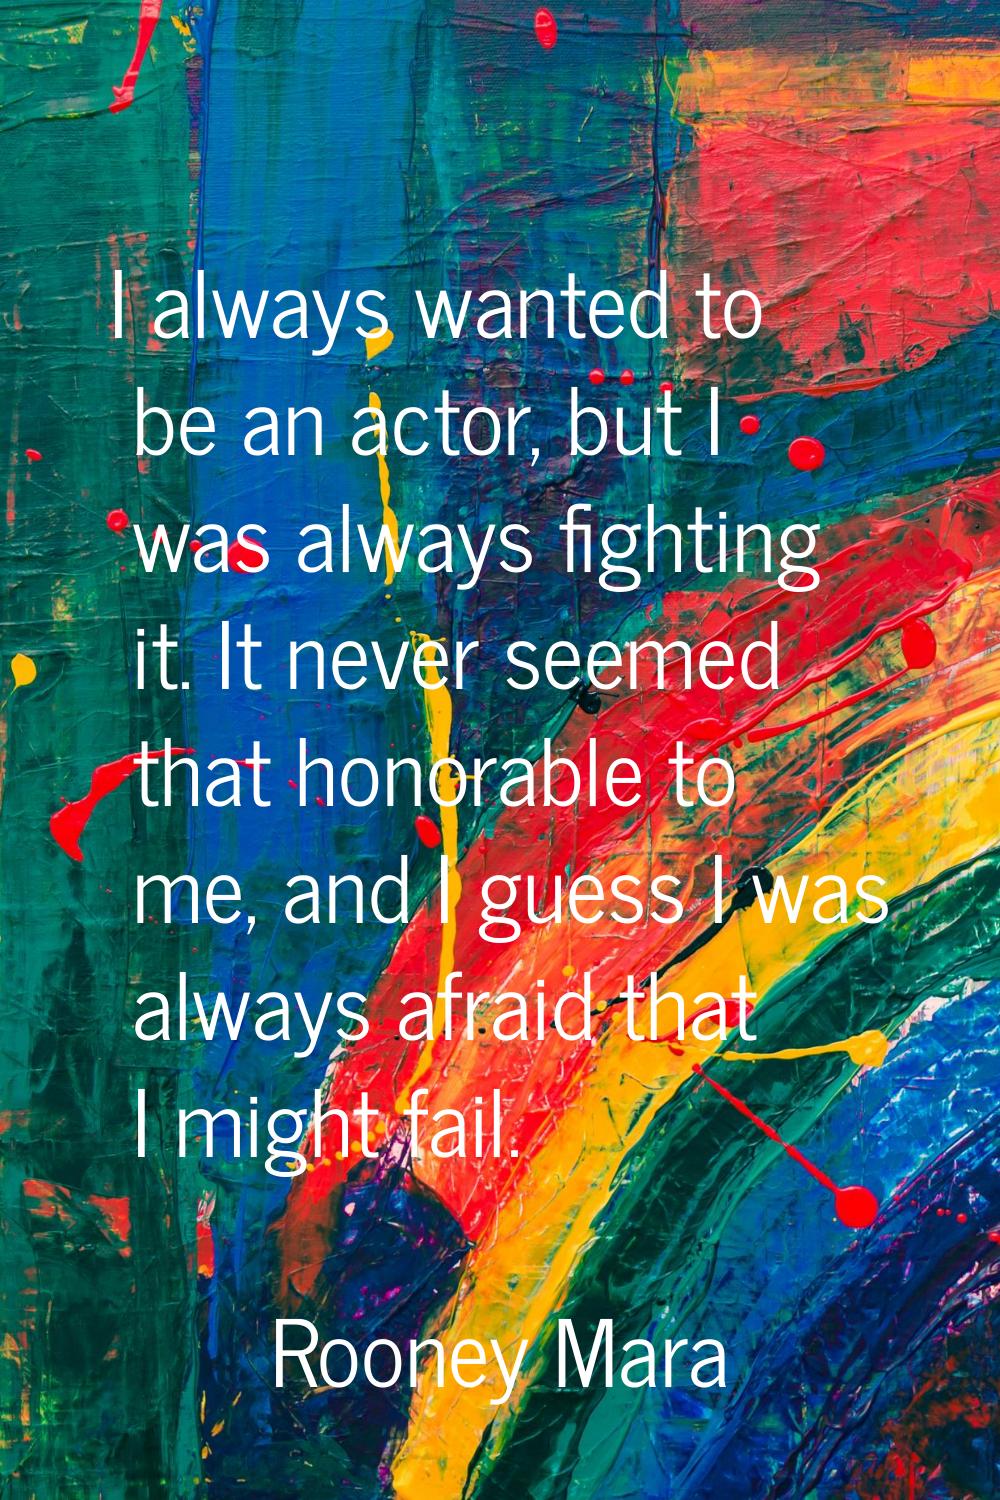 I always wanted to be an actor, but I was always fighting it. It never seemed that honorable to me,